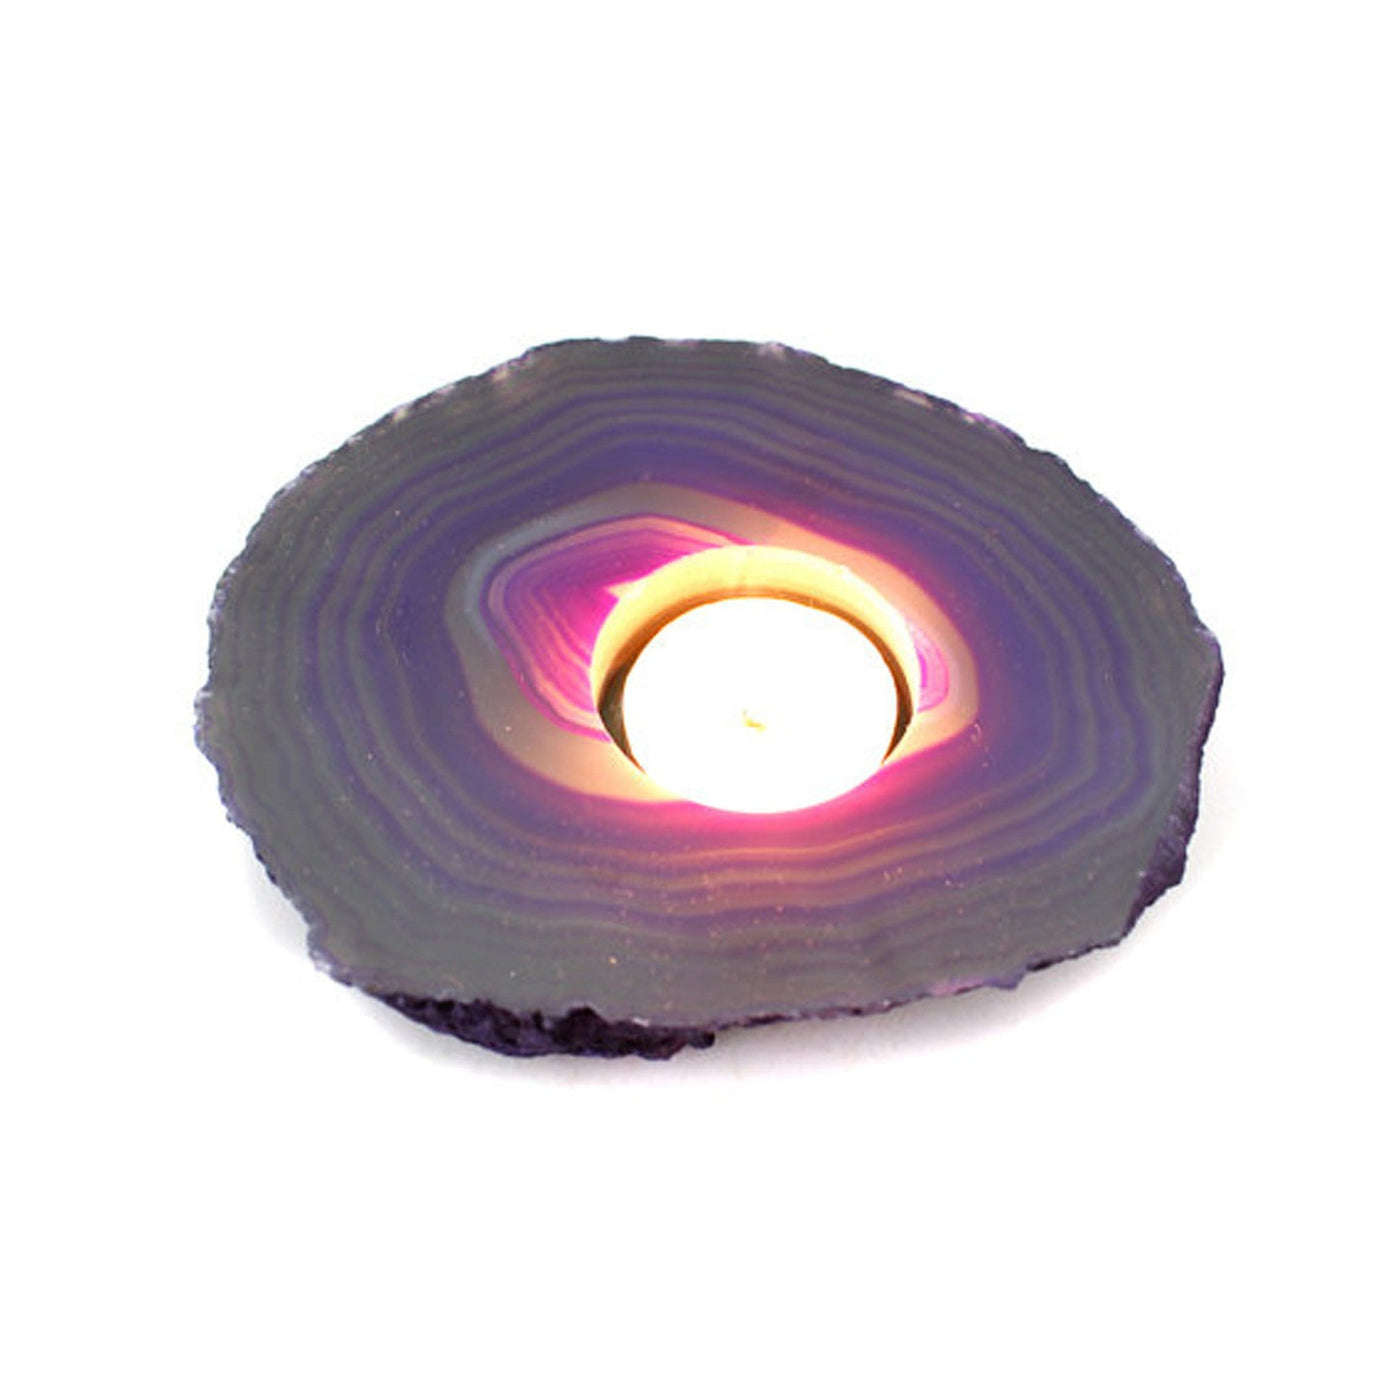 agate slab candle holder with a candle lit up in it